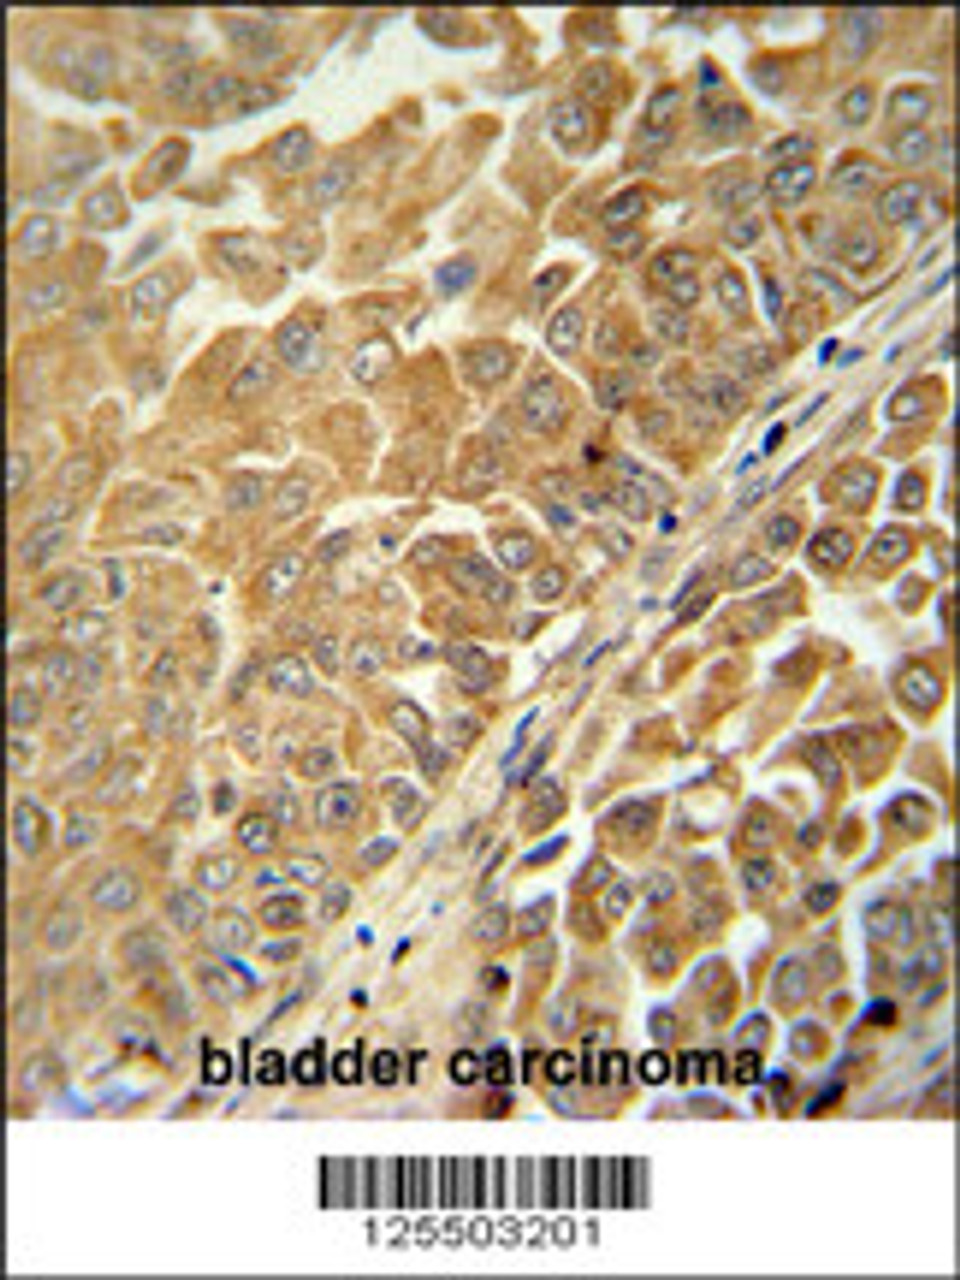 CR025 antibody immunohistochemistry analysis in formalin fixed and paraffin embedded human bladder carcinoma followed by peroxidase conjugation of the secondary antibody and DAB staining.